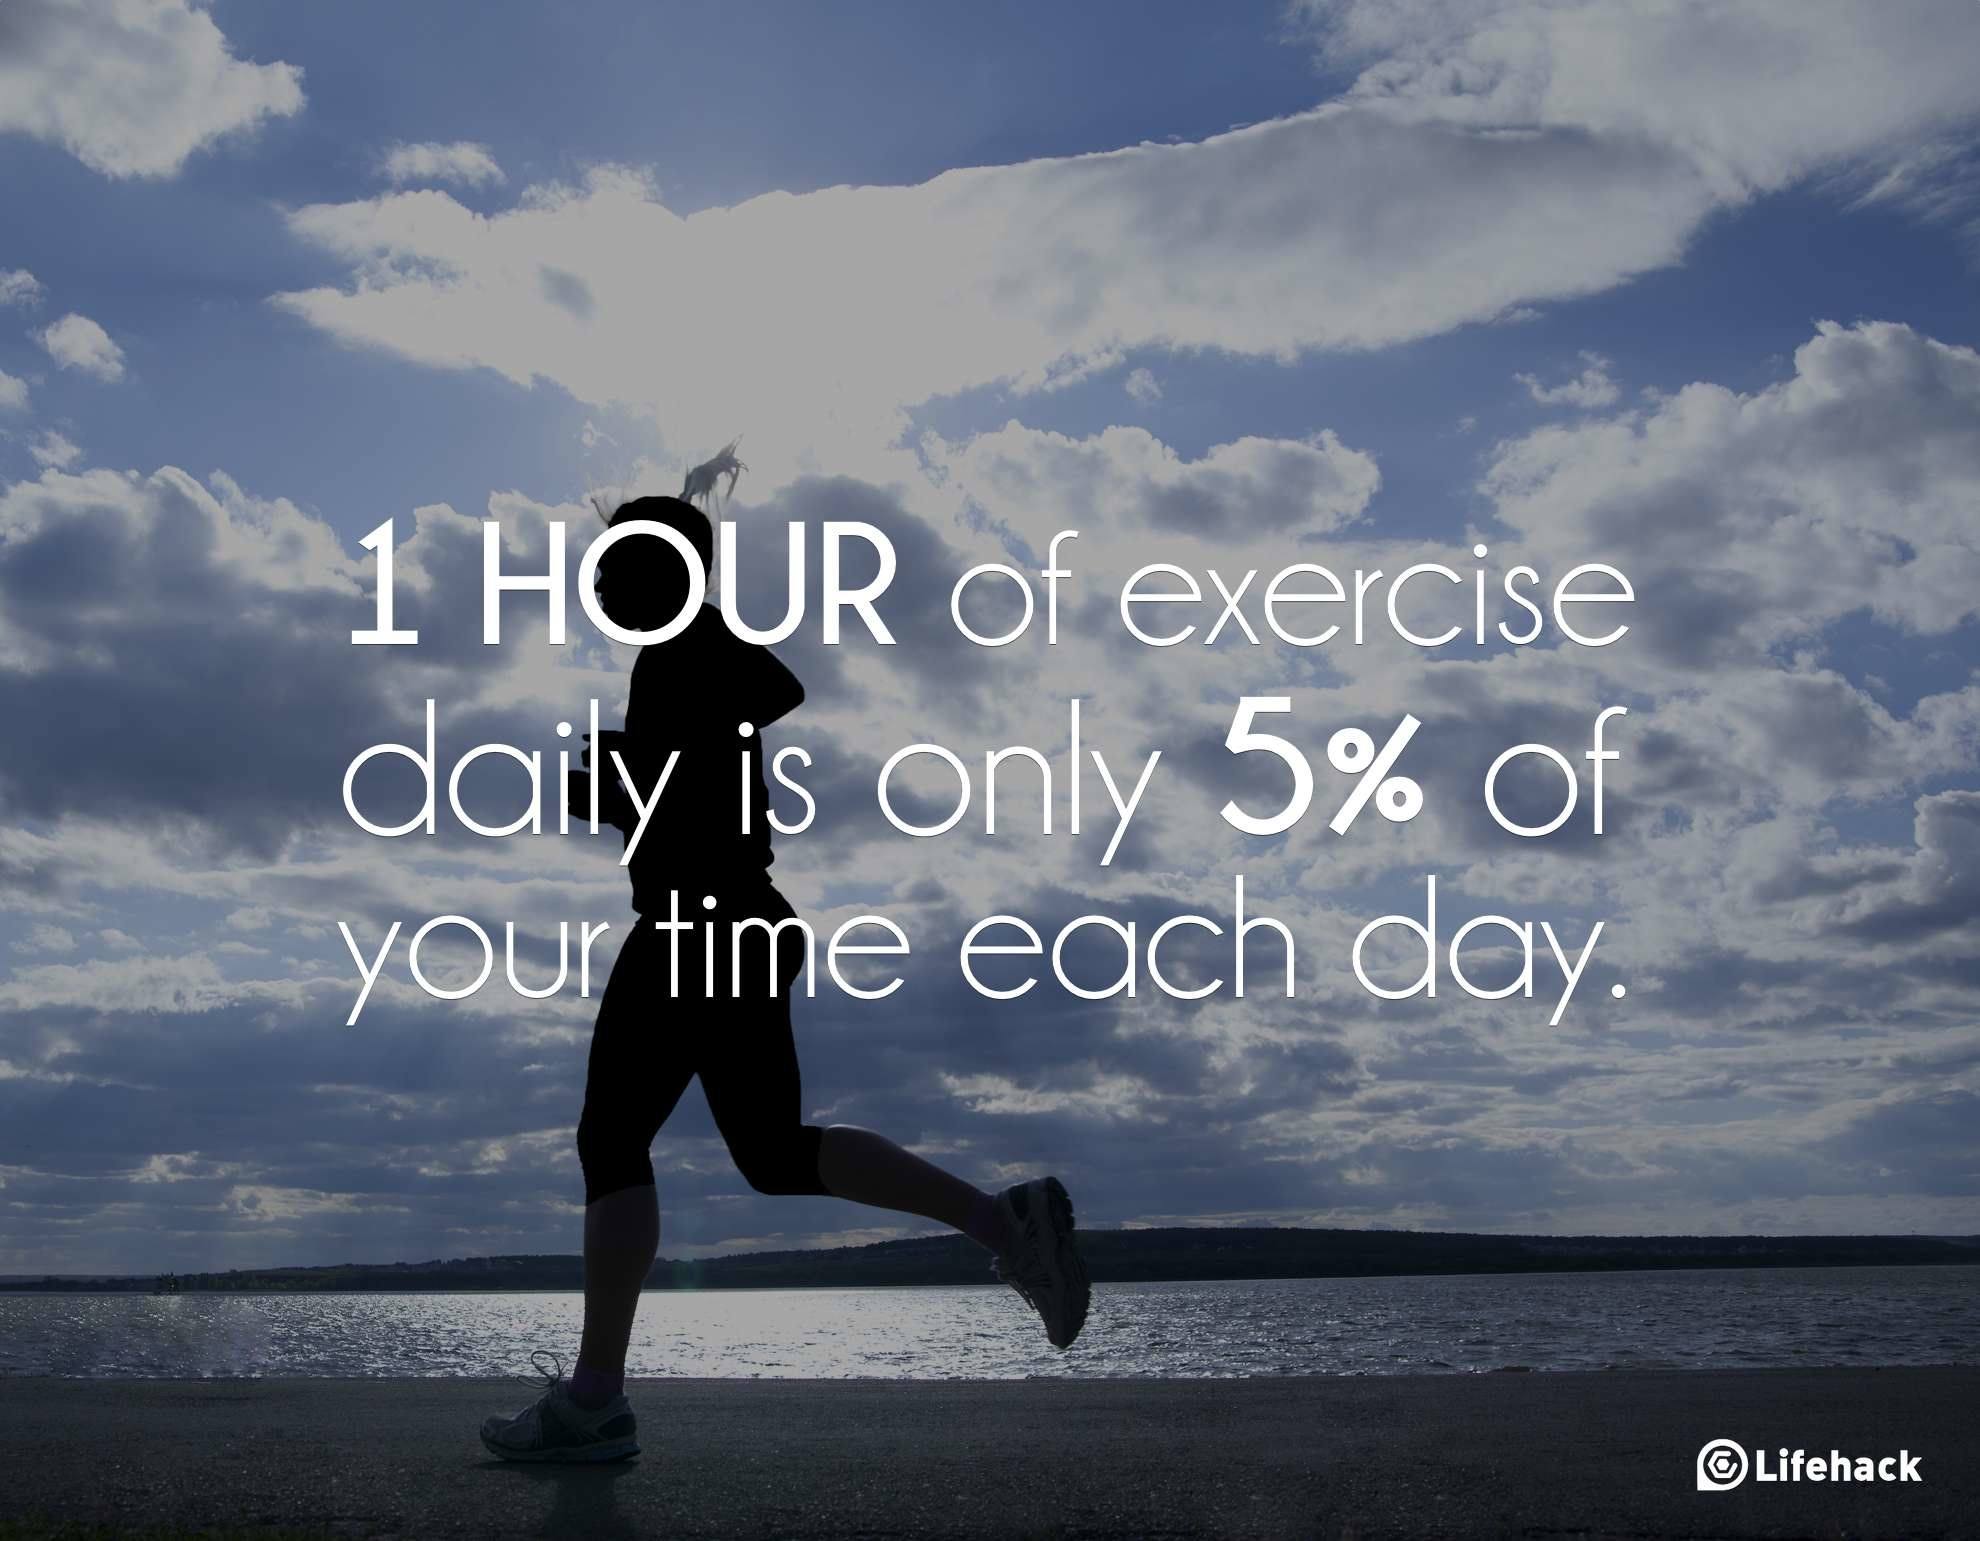 30sec Tip: How Much Time Do you Spend Exercising Each Day?